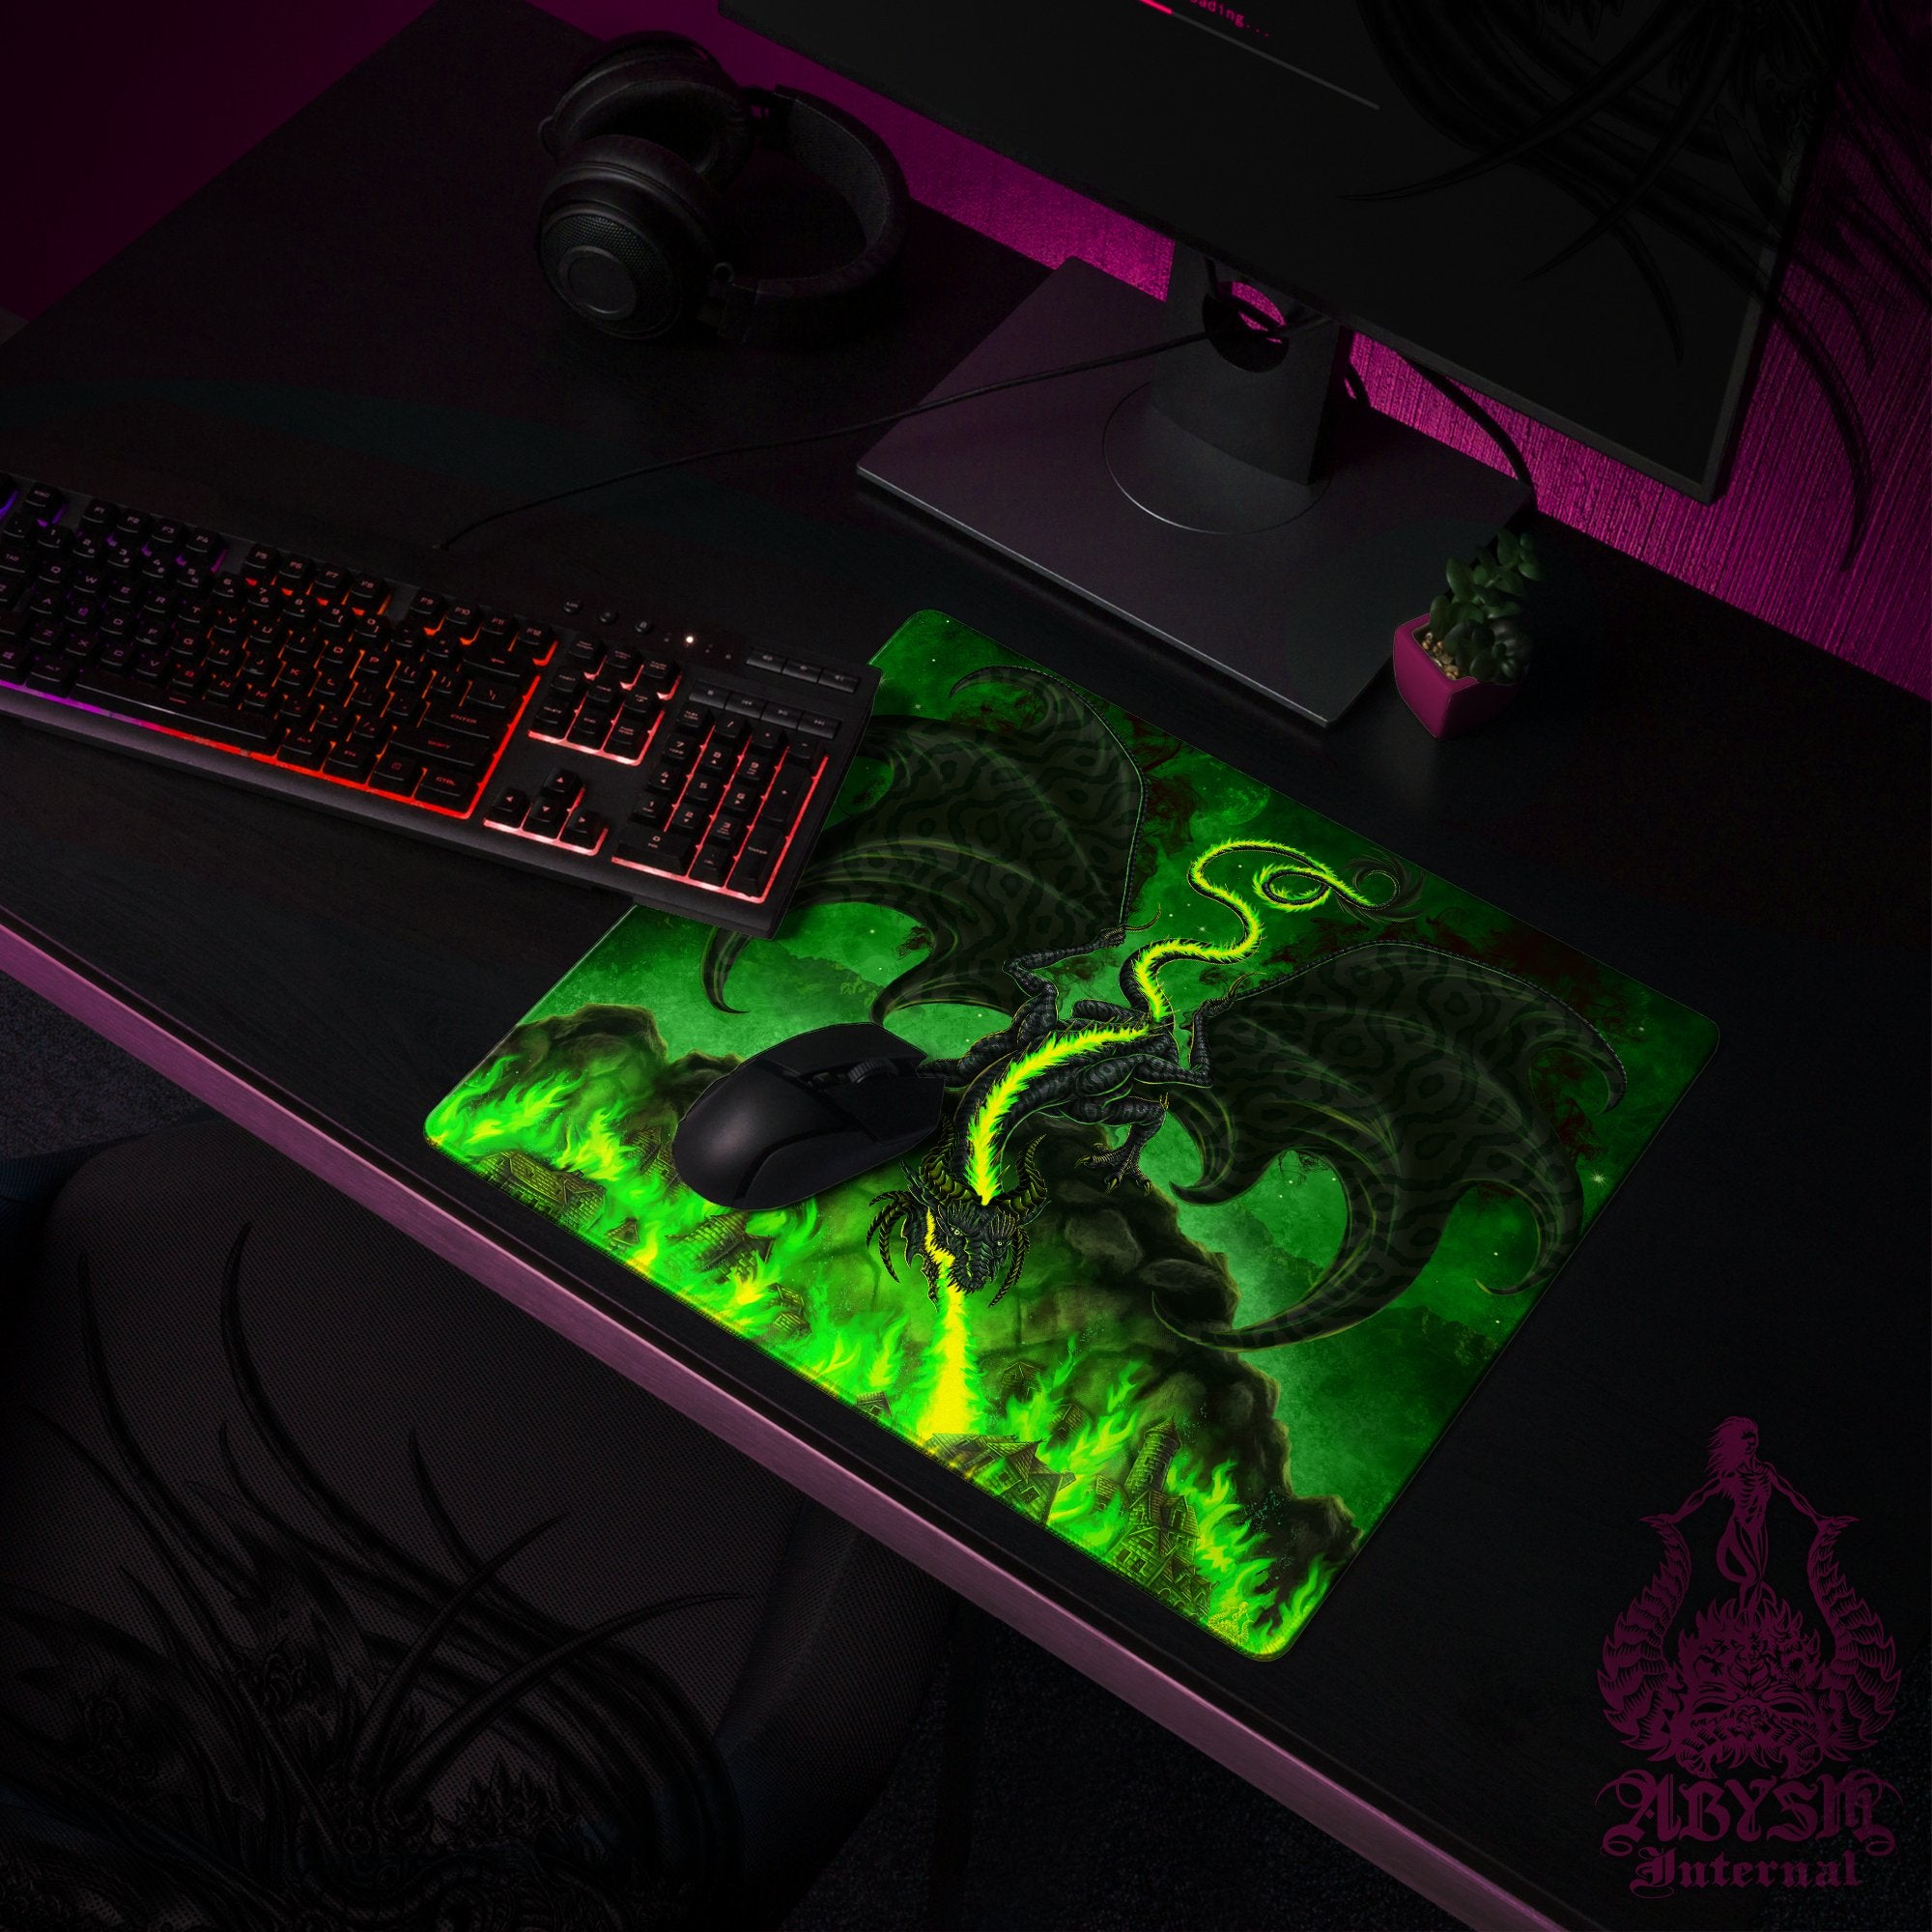 Dragon Gaming Mouse Pad, Fantasy Art Desk Mat, Black and Green Table Protector Cover, RPG Workpad, DM Gift Print - Fire - Abysm Internal